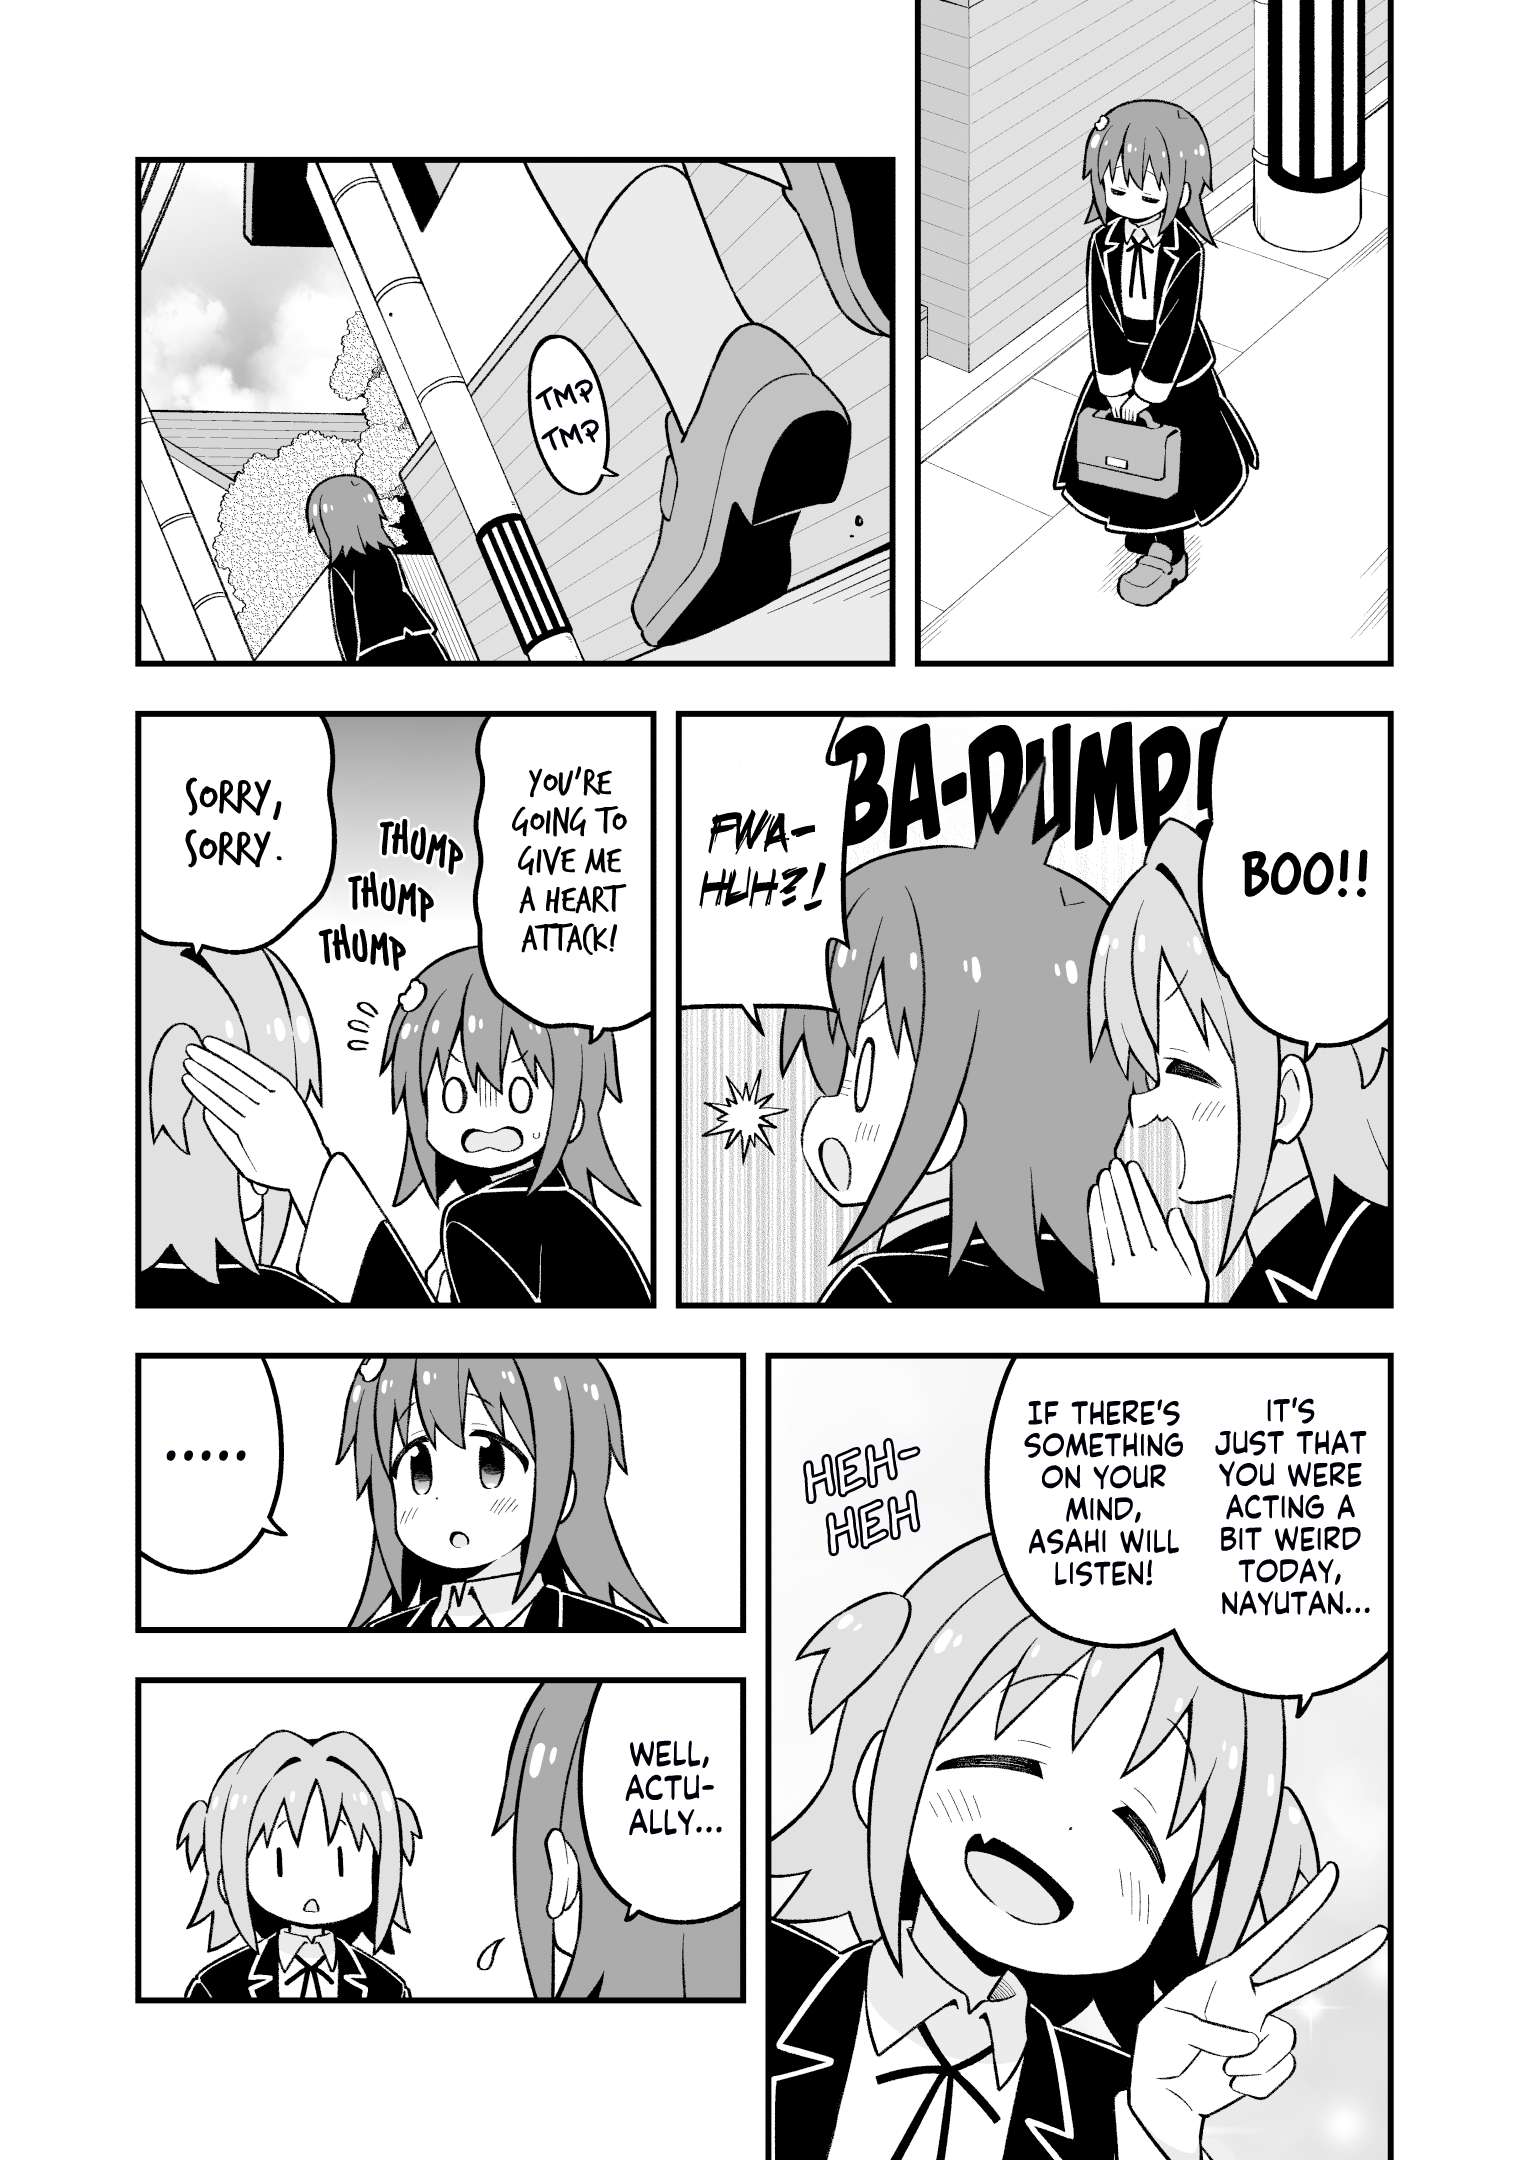 Onii-chan is done for - chapter 77 - #3